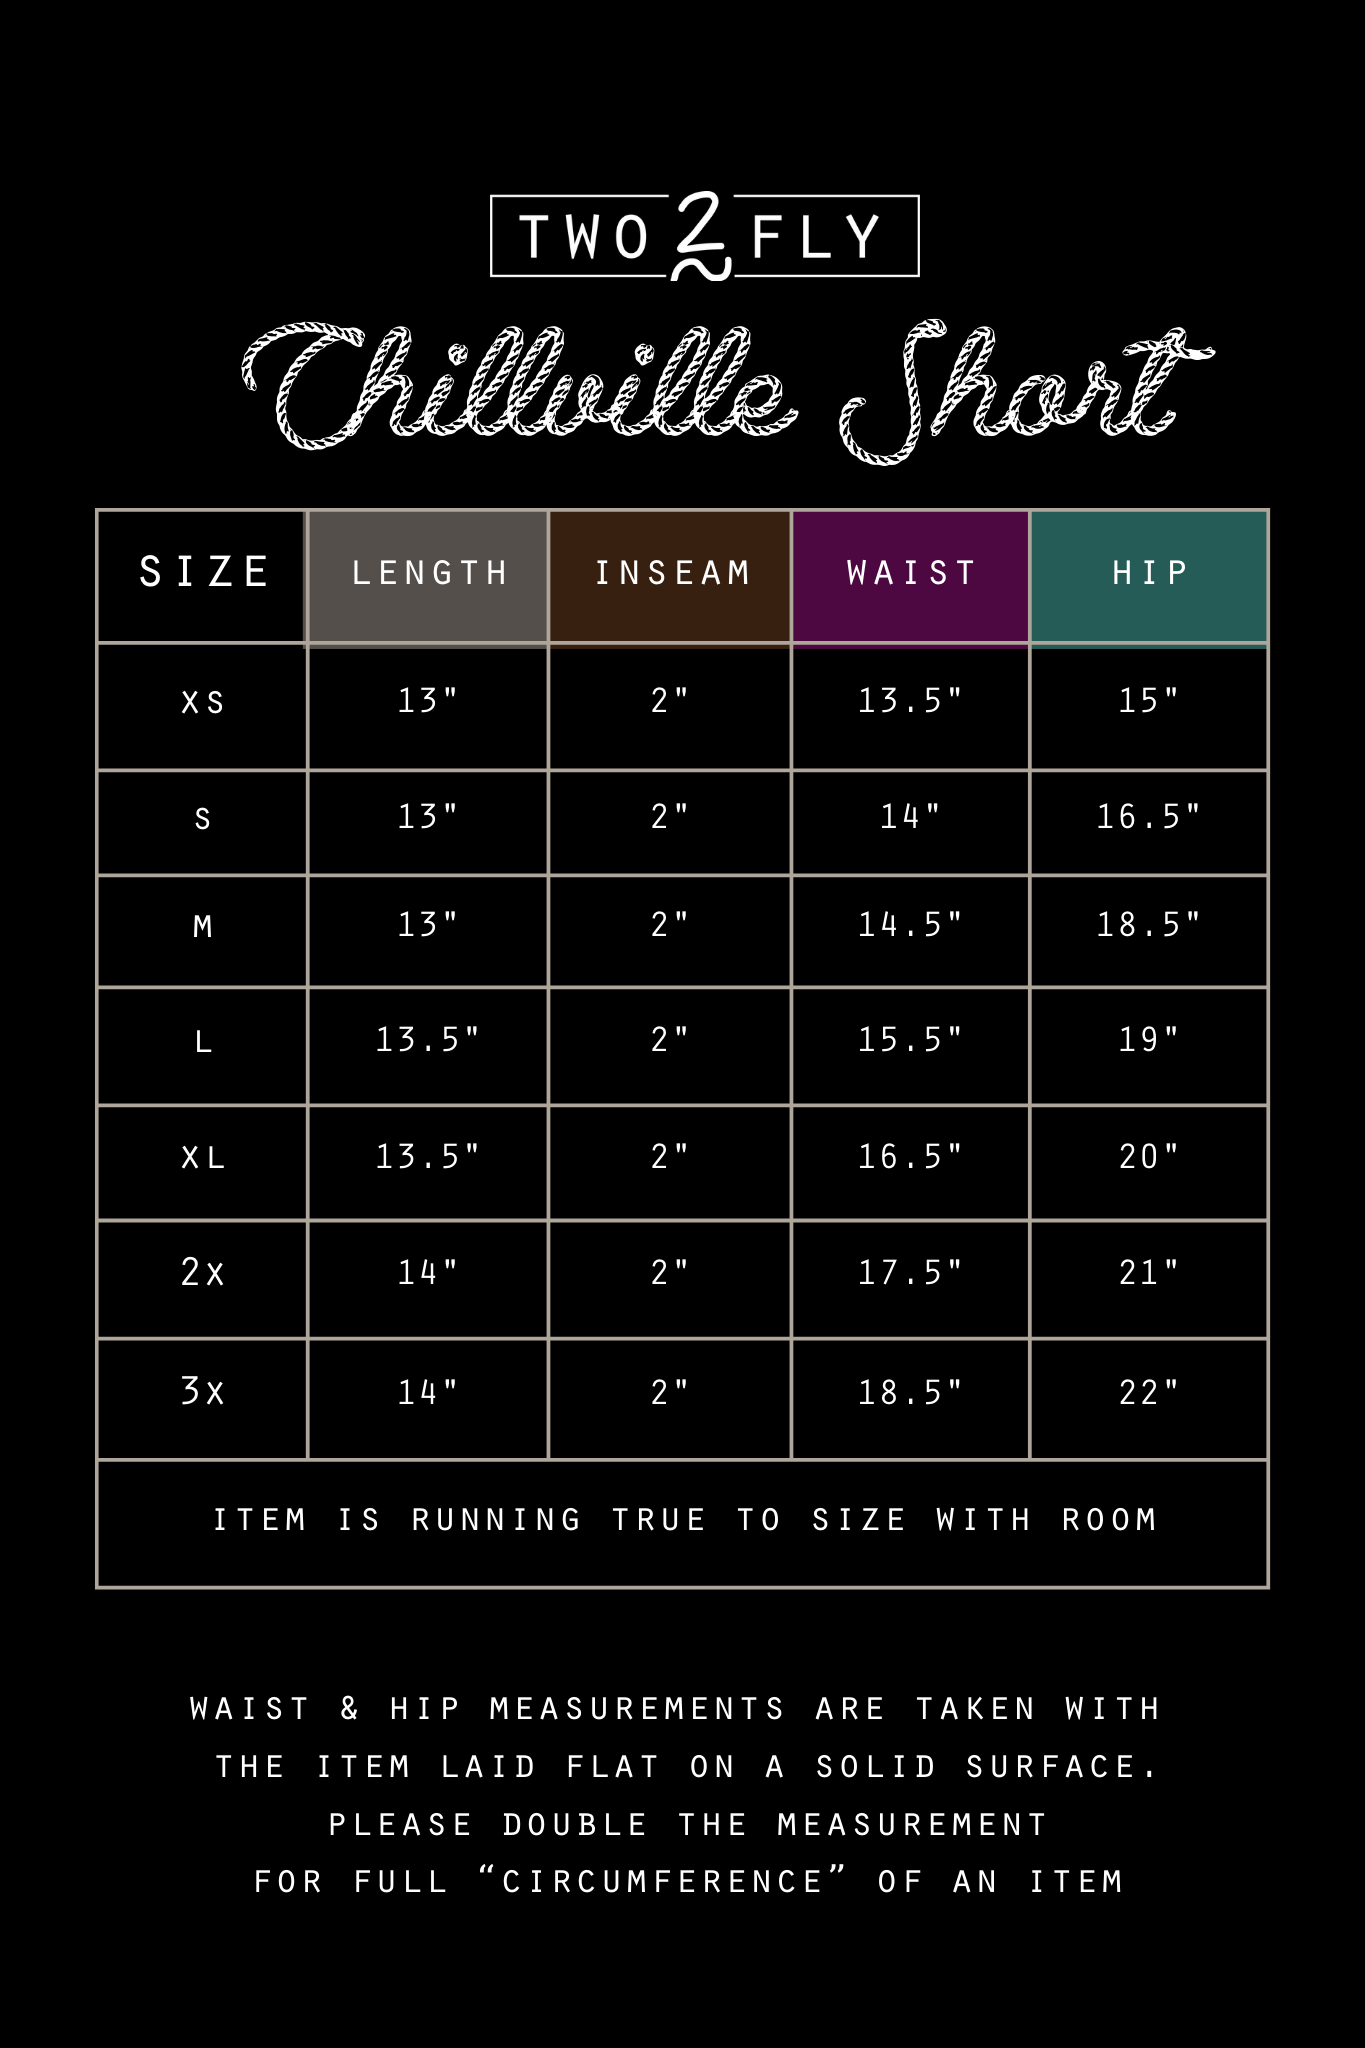 CHILLVILLE SHORTS *SADDLE [L & 3X ONLY]